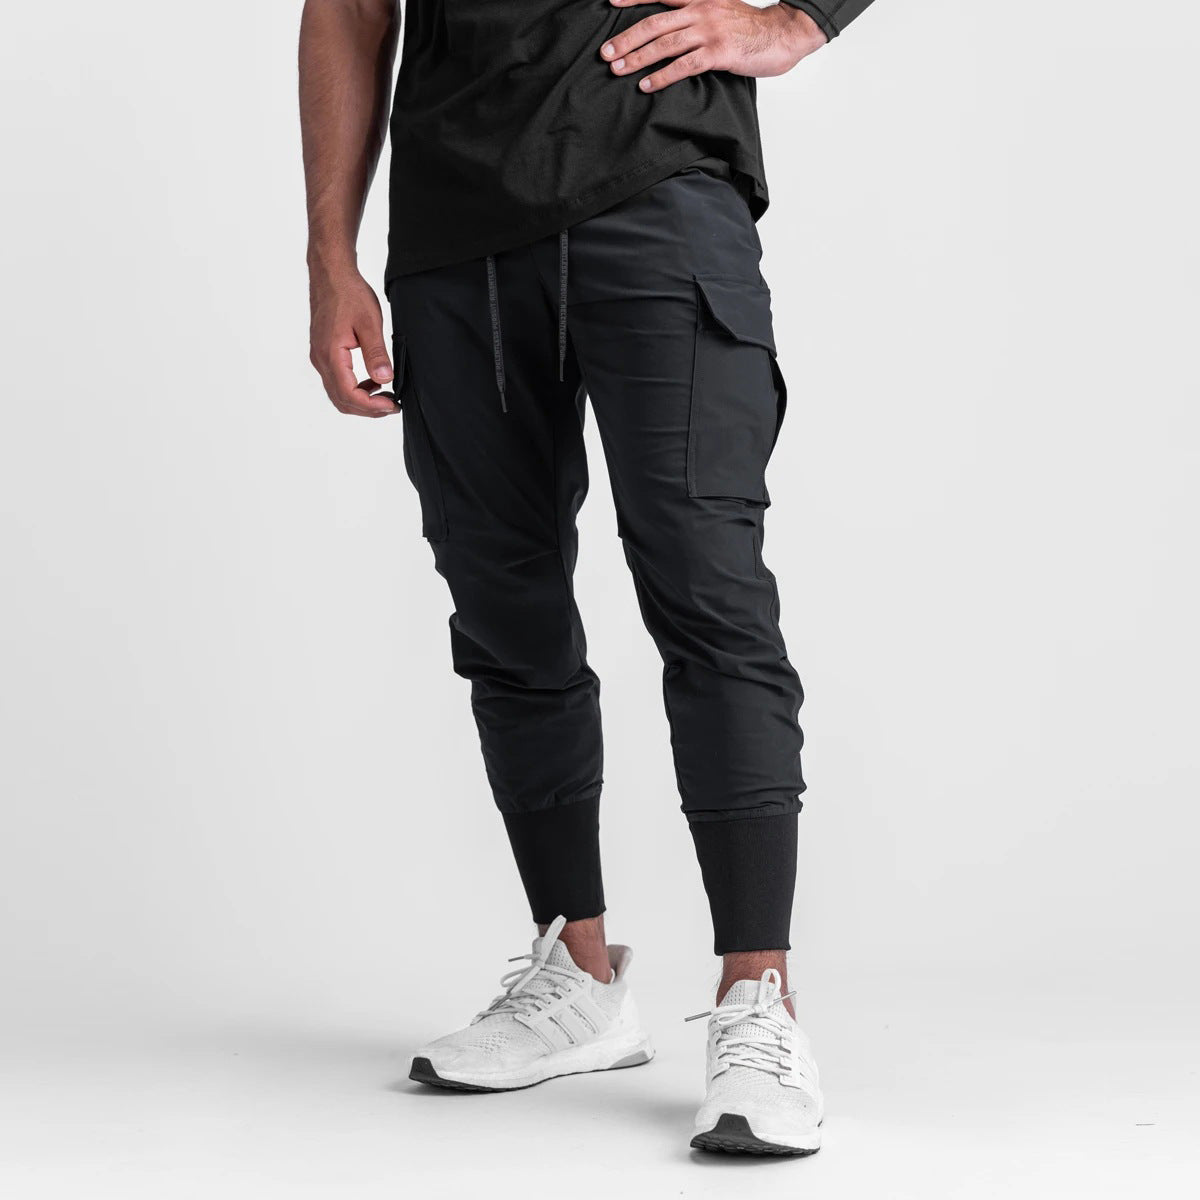 Men's Fitness Casual Pants - Lightweight and Moisture-Wicking